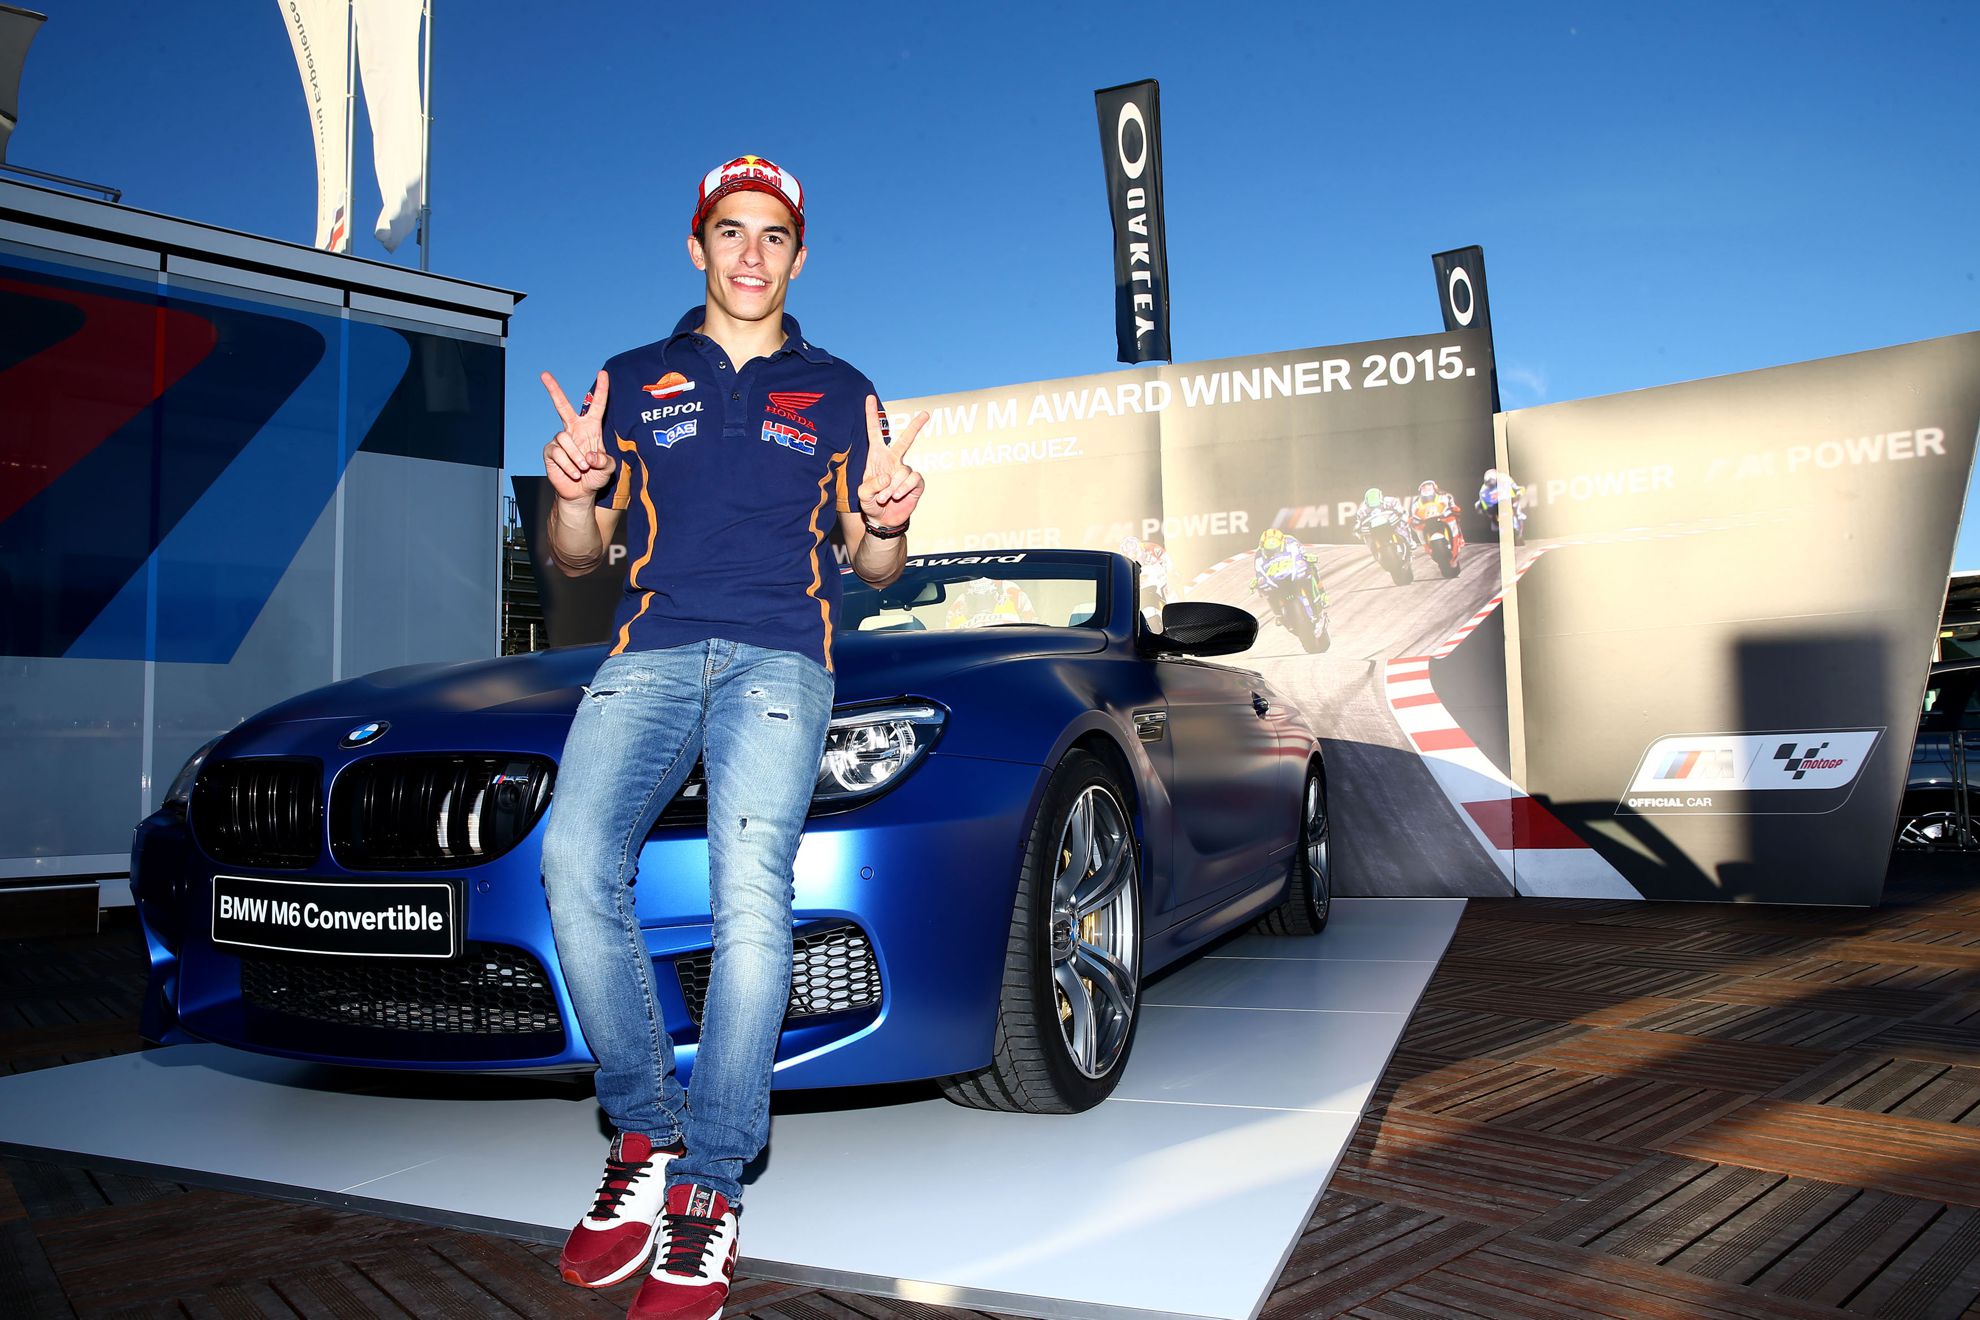 2015 BMW M Award: Marc Marquez wins the exclusive BMW M6 Convertible.